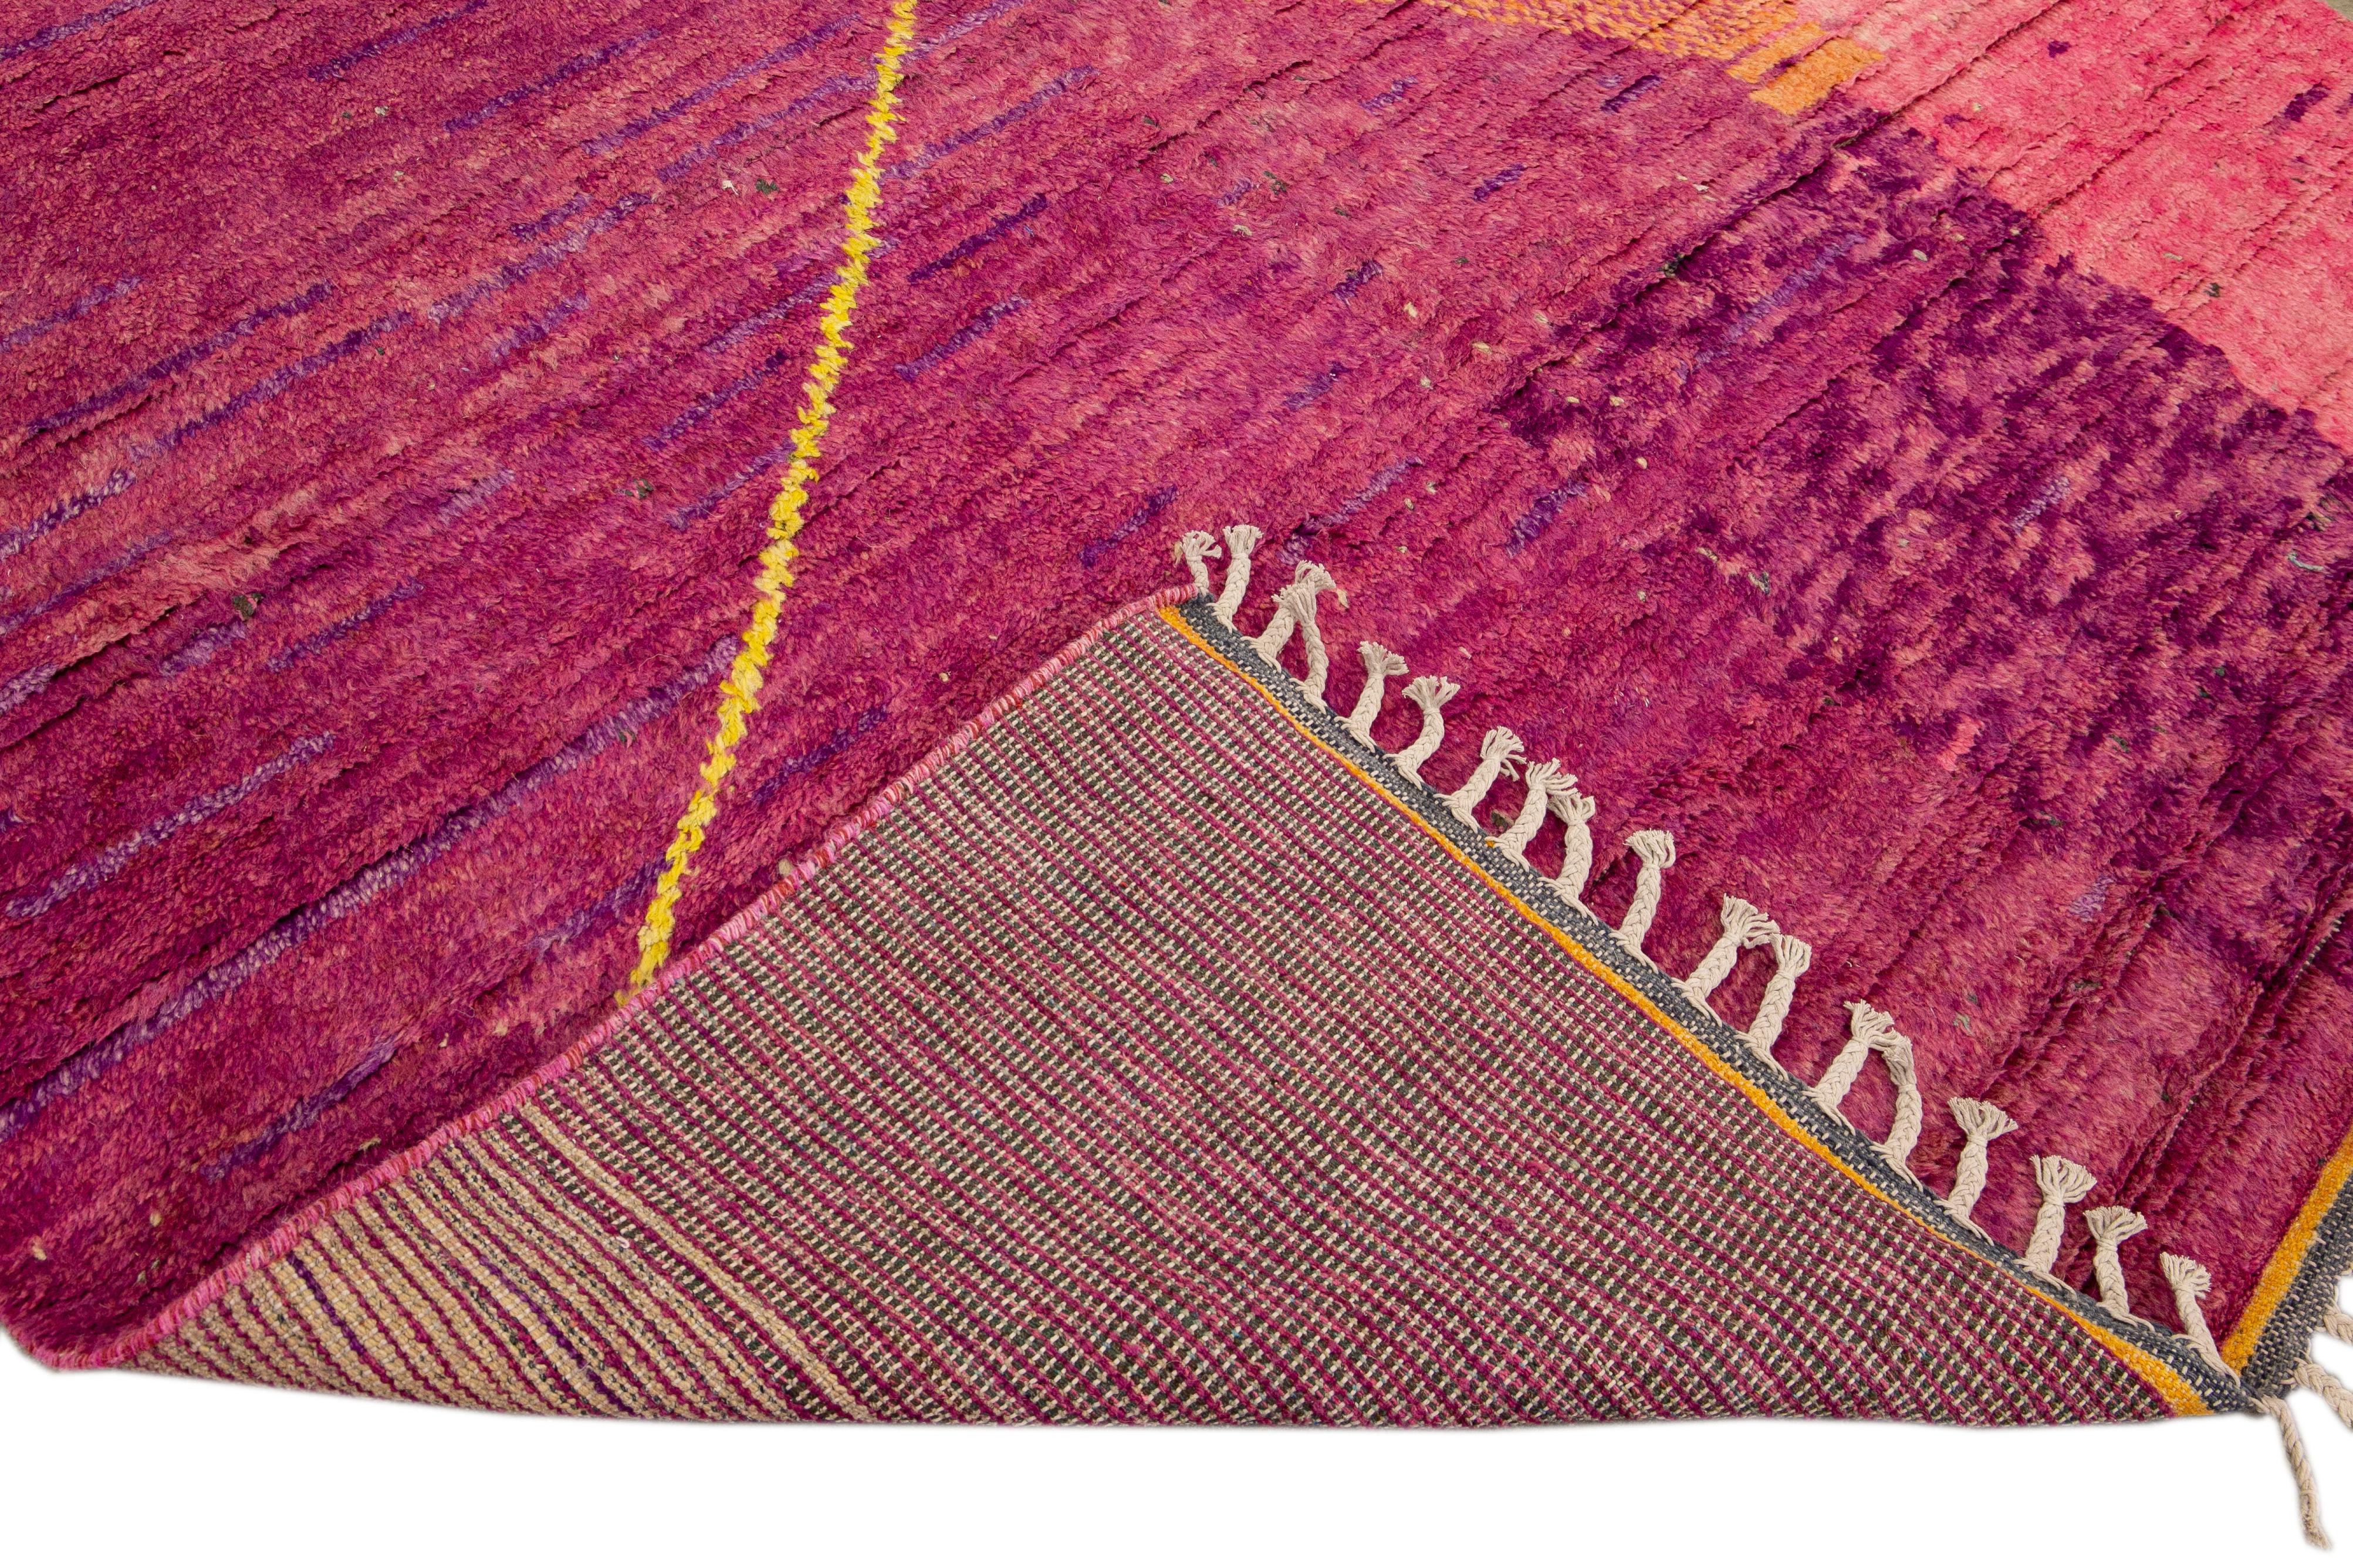 Beautiful Moroccan style handmade wool rug with a purple and pink field. This Modern rug has orange and yellow accents and beige fringes featuring a gorgeous all-over boho minimal design.

This rug measures: 7'8